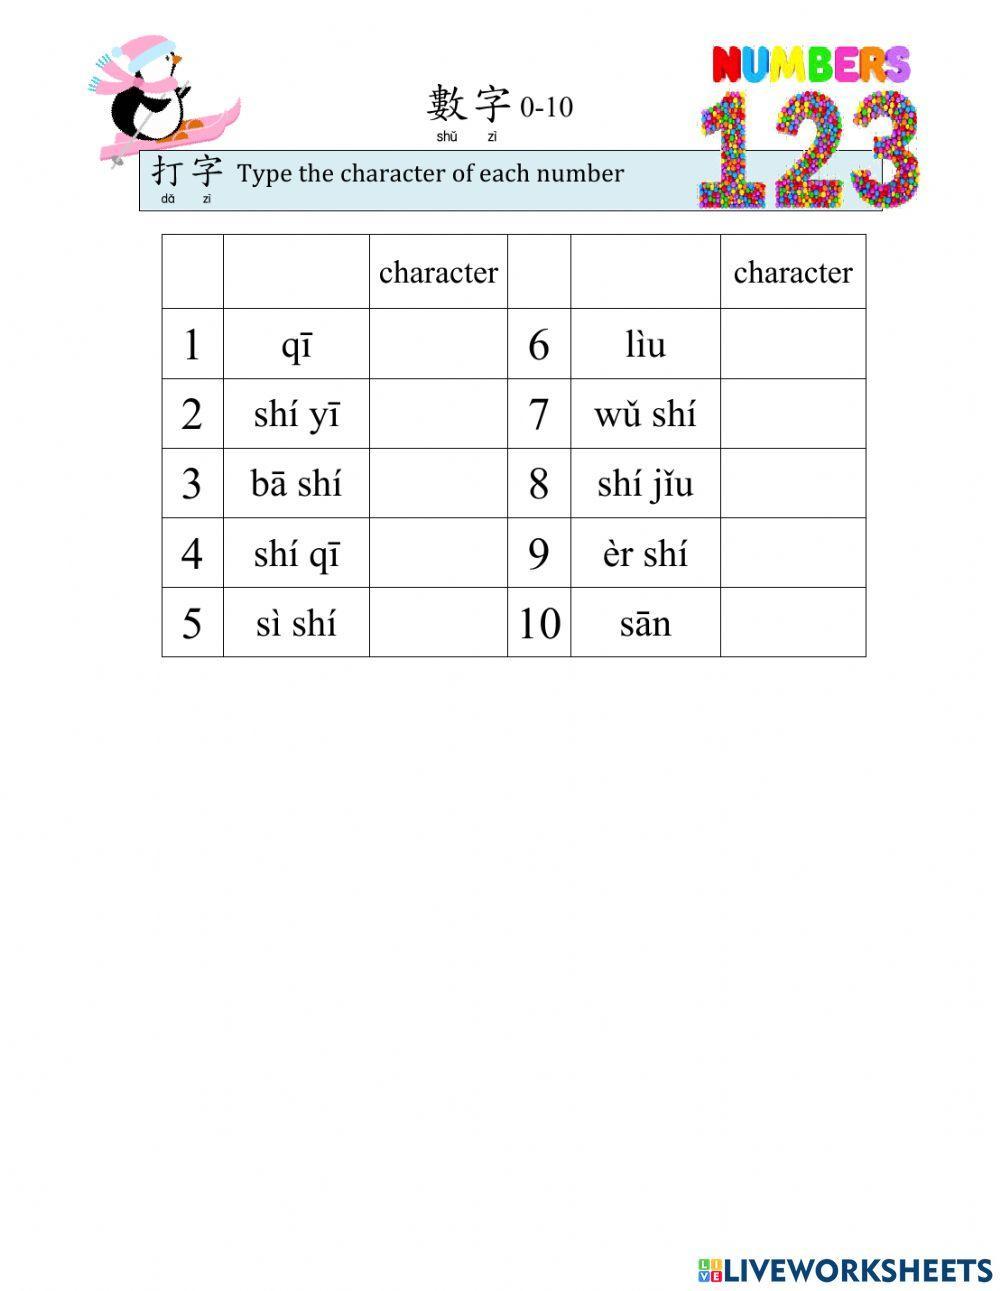 Numbers 10s character typing